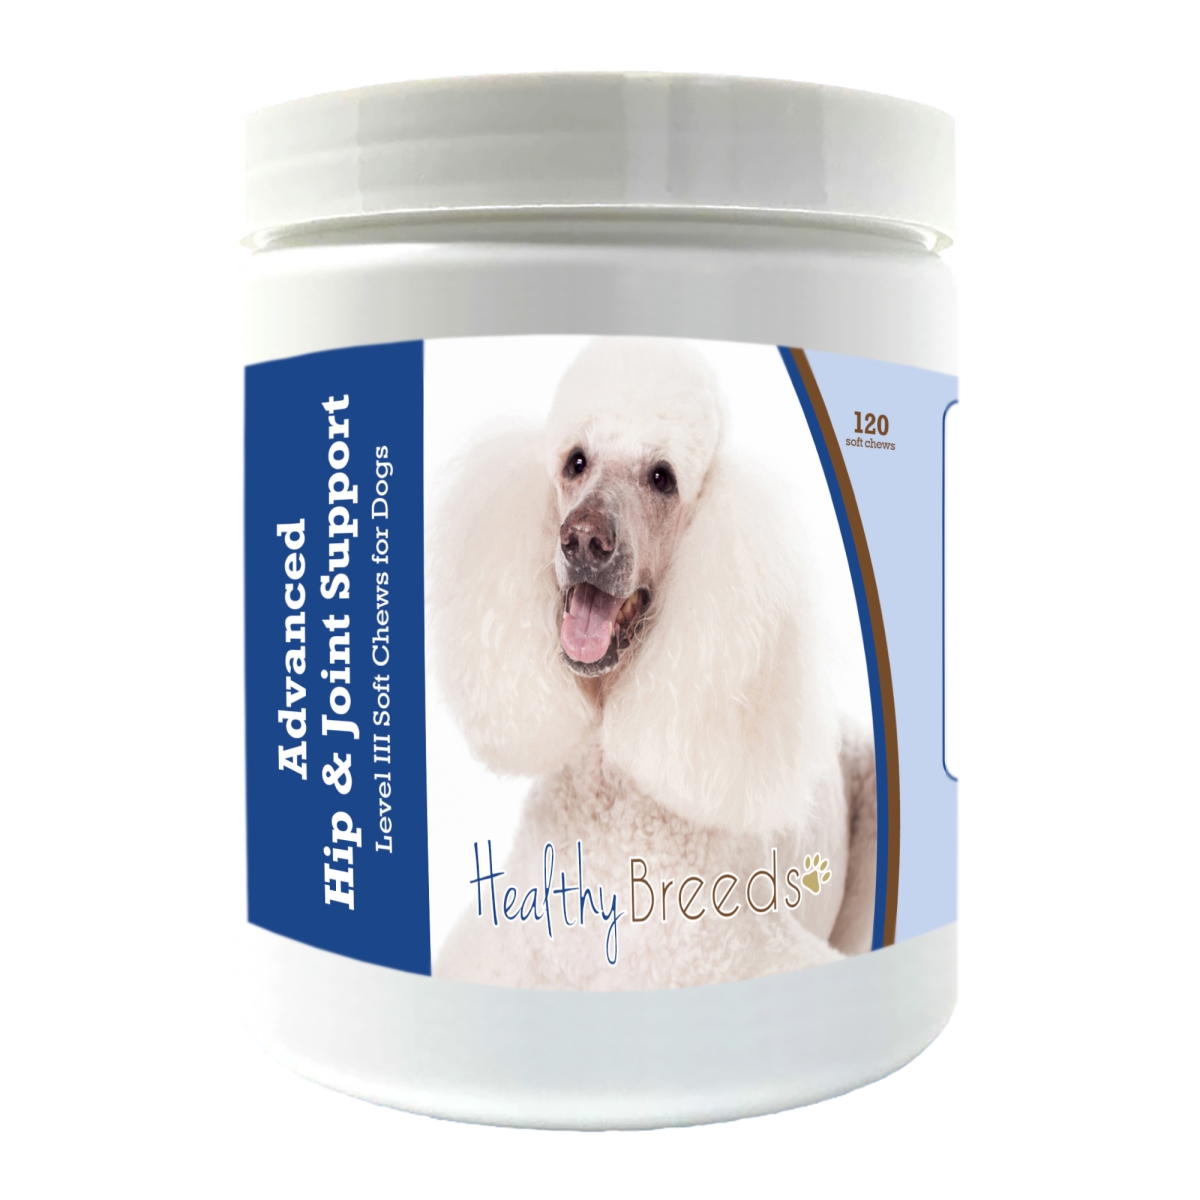 Picture of Healthy Breeds 192959898958 Poodle Advanced Hip & Joint Support Level III Soft Chews for Dogs